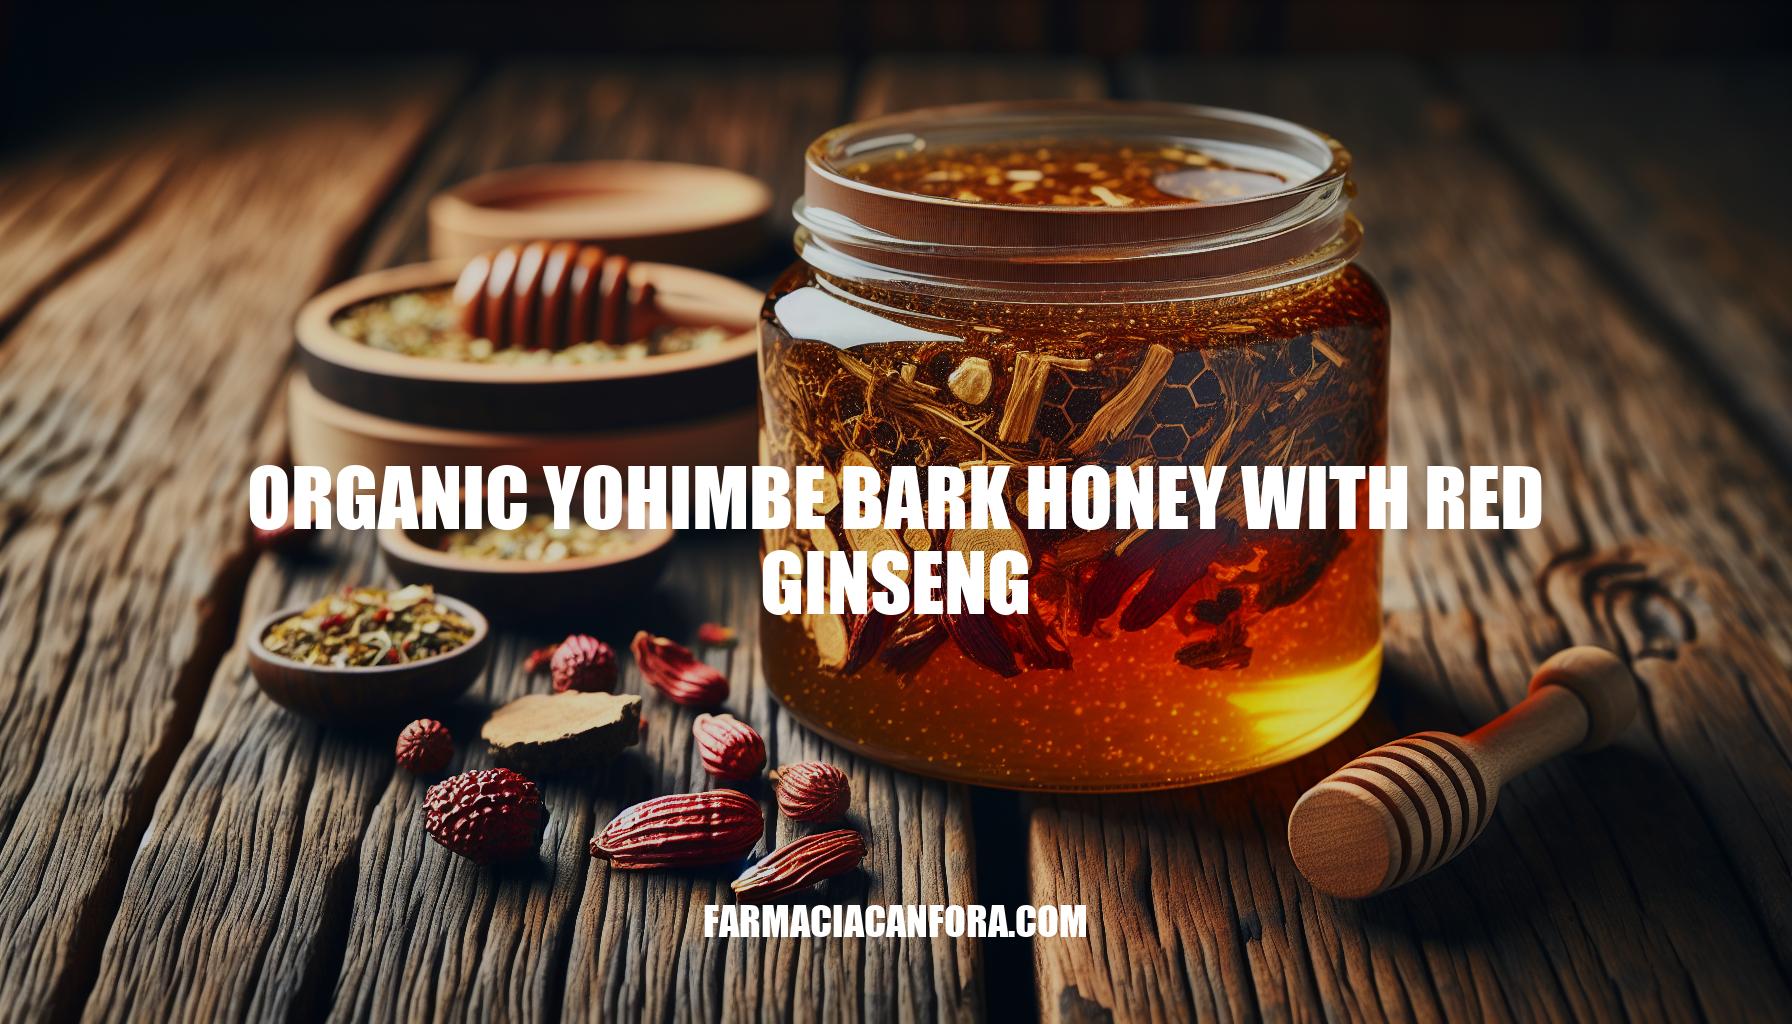 Organic Yohimbe Bark Honey with Red Ginseng: A Powerful Herbal Blend